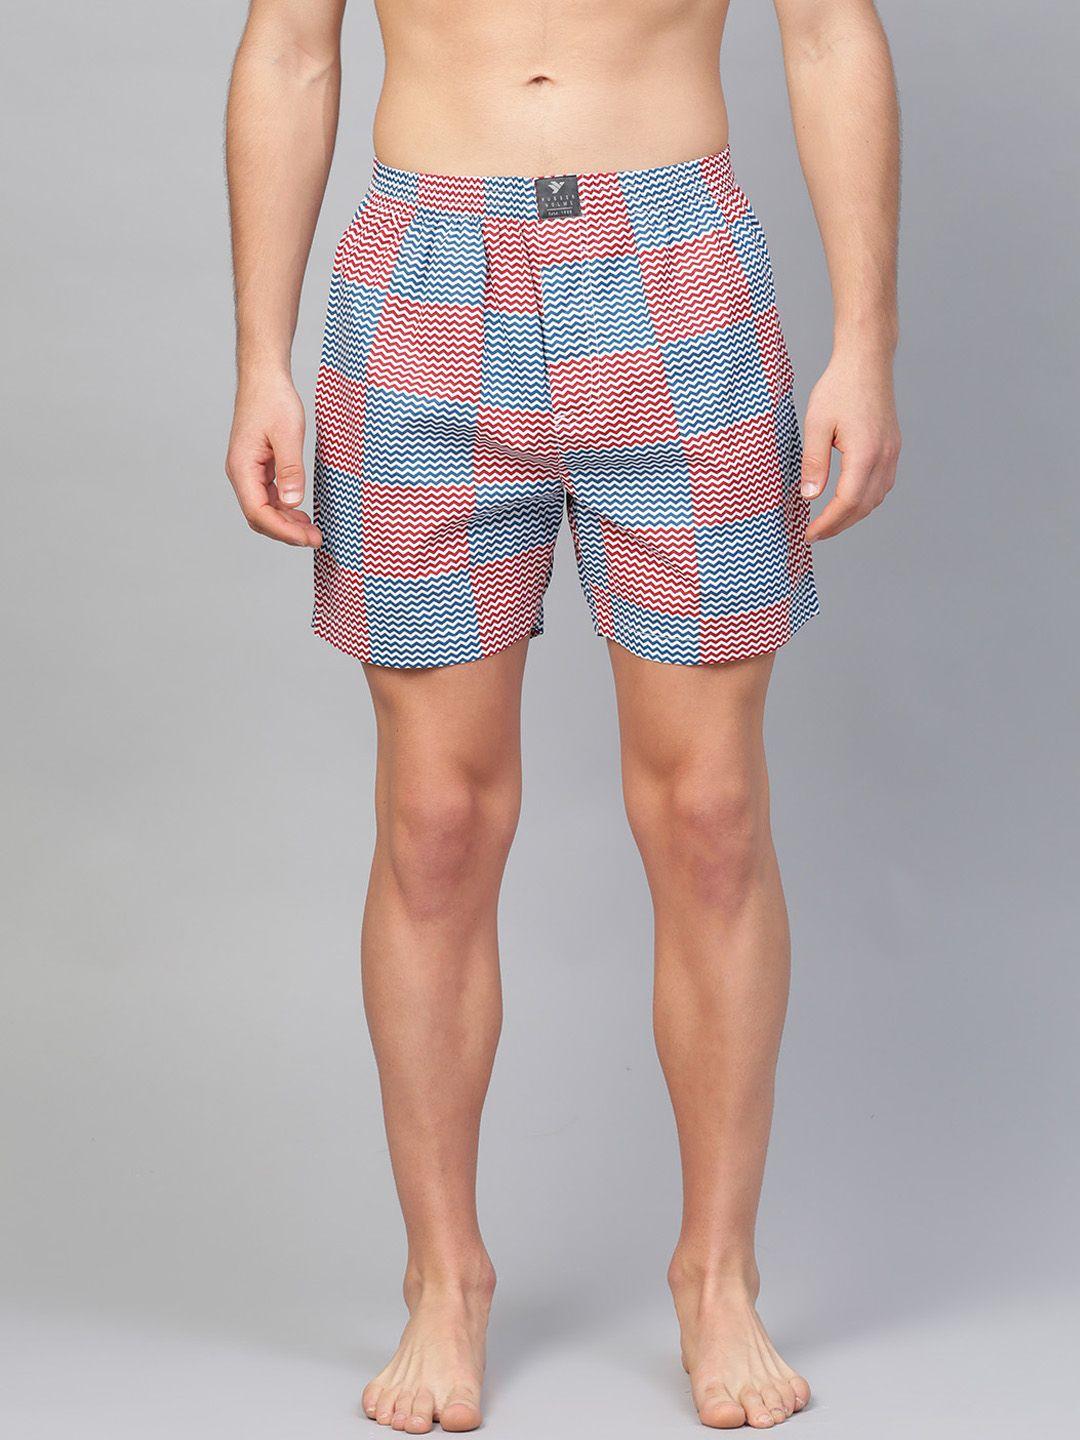 hubberholme-men-blue-&-red-checked-pure-cotton-boxers-1510